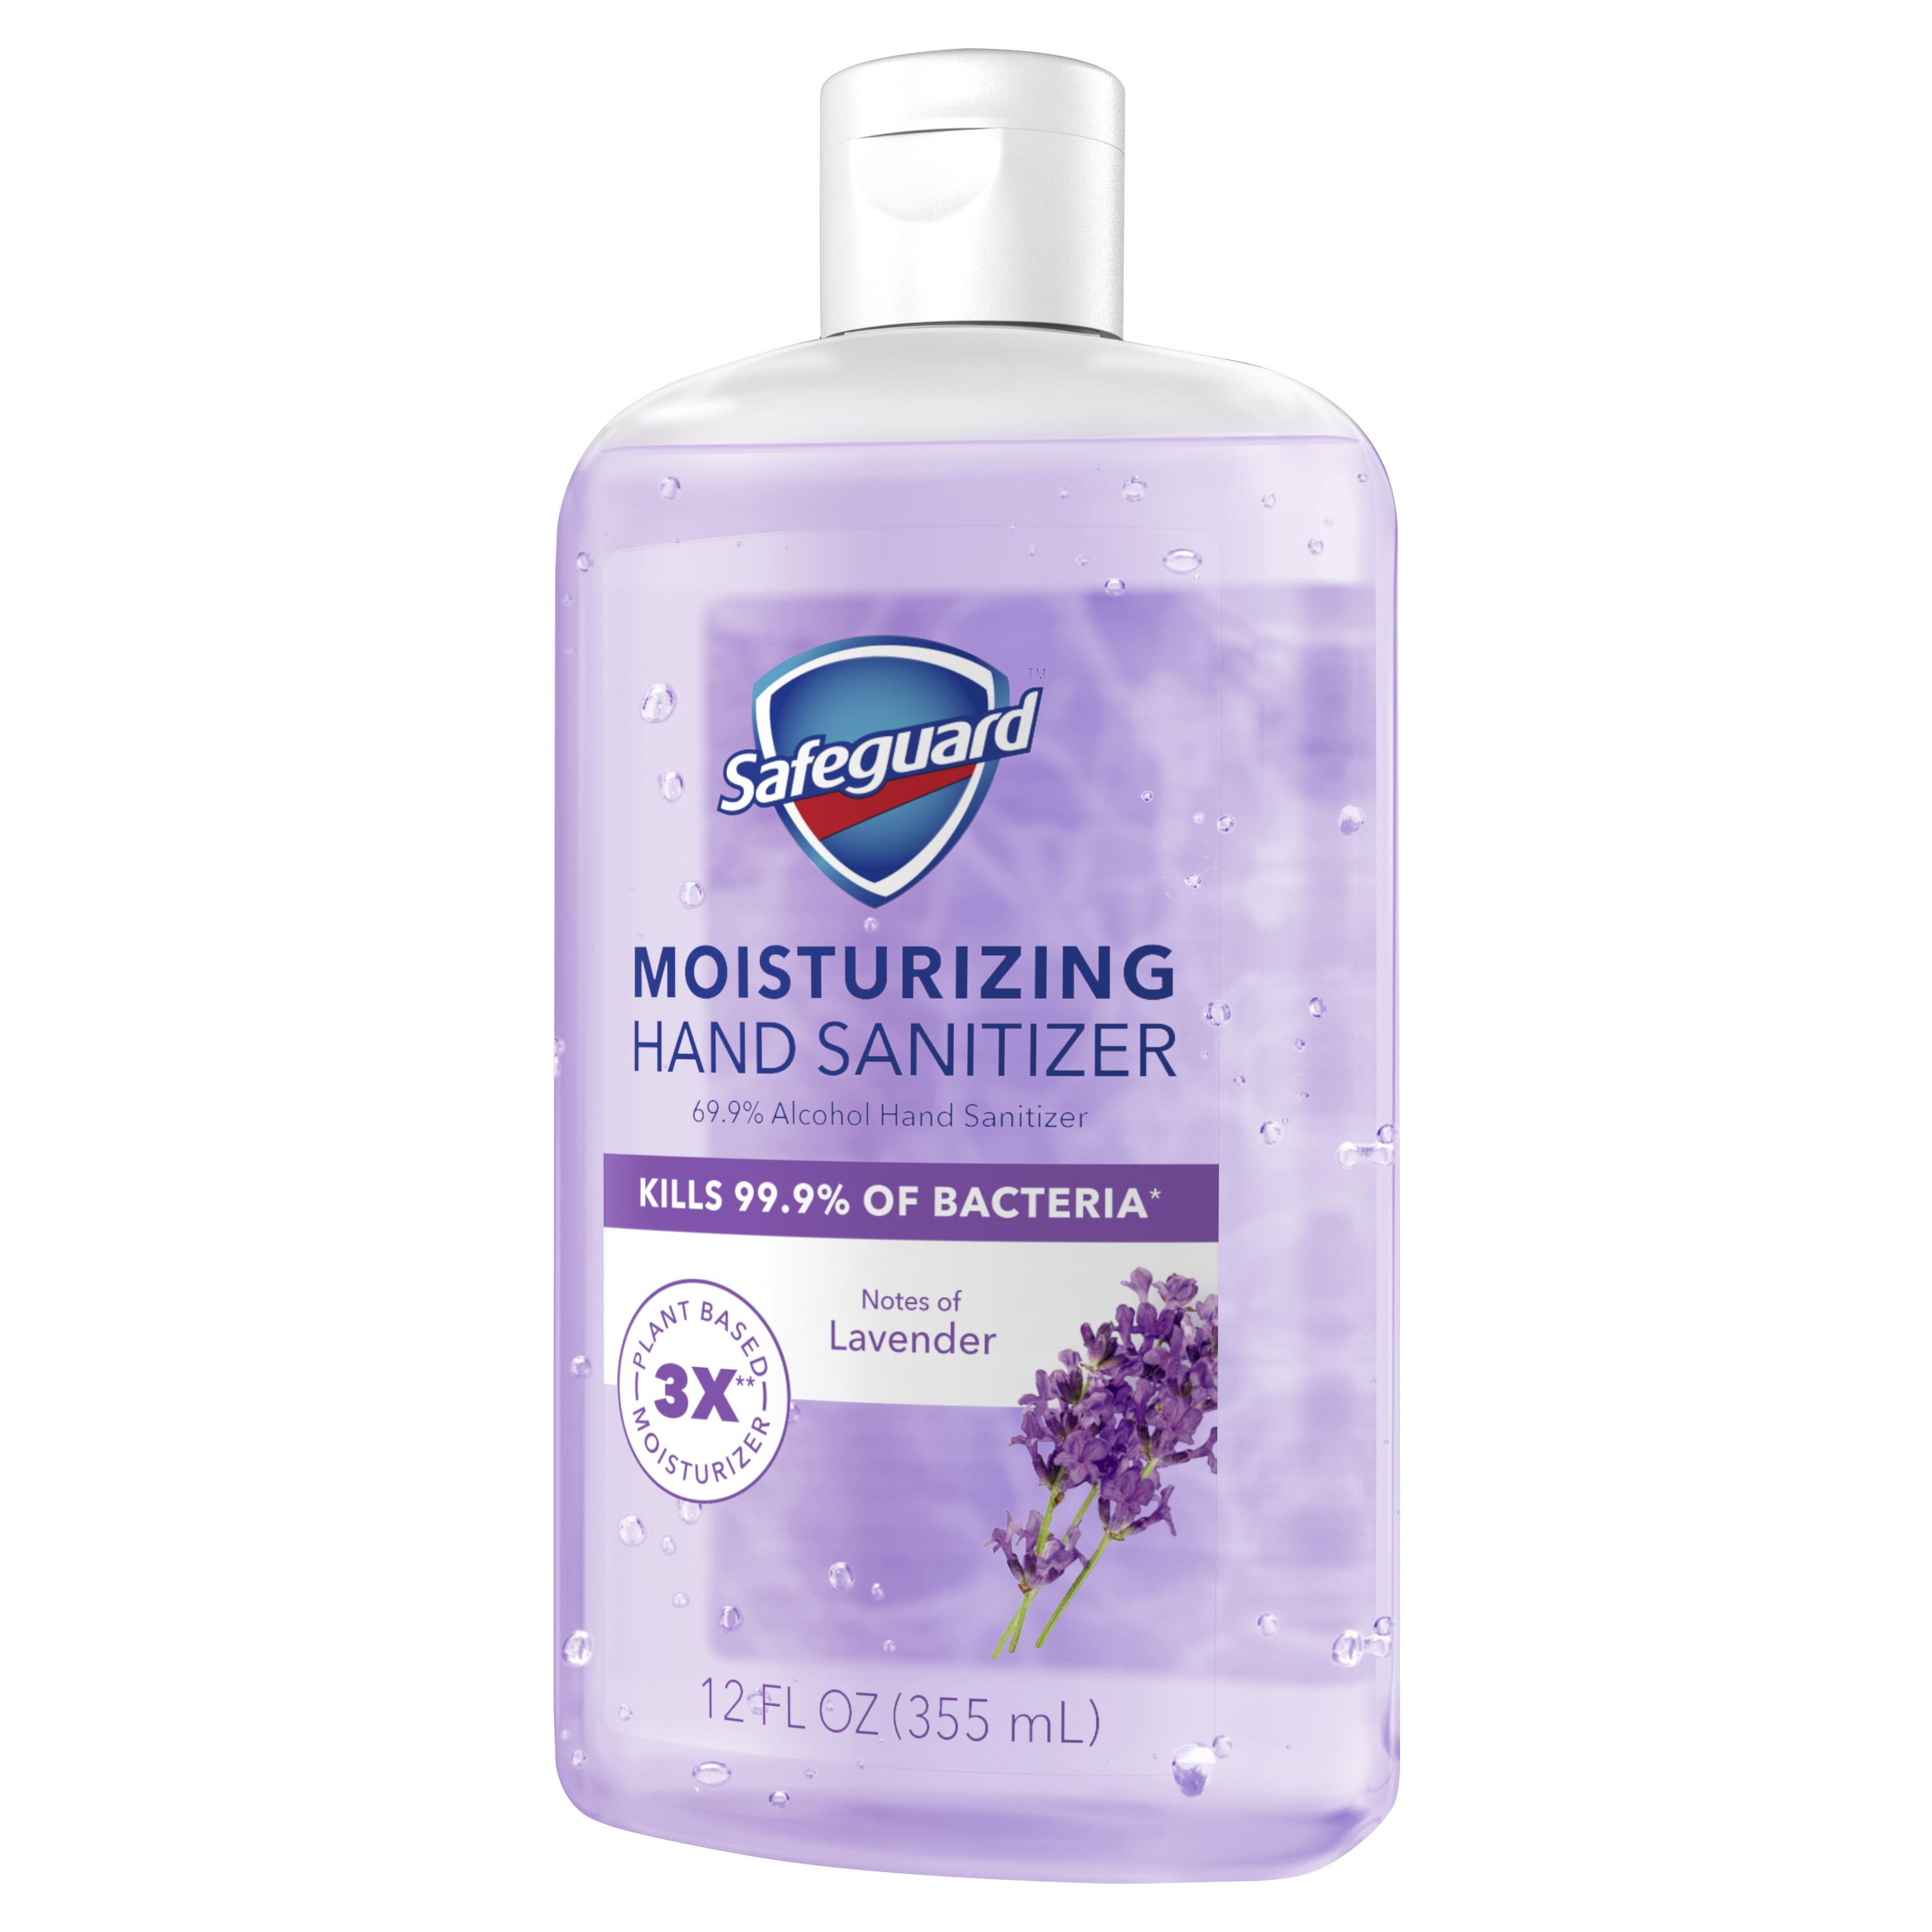 Safeguard Hand Sanitizer, Notes of Lavender, Contains Alcohol, 12 oz - image 3 of 4